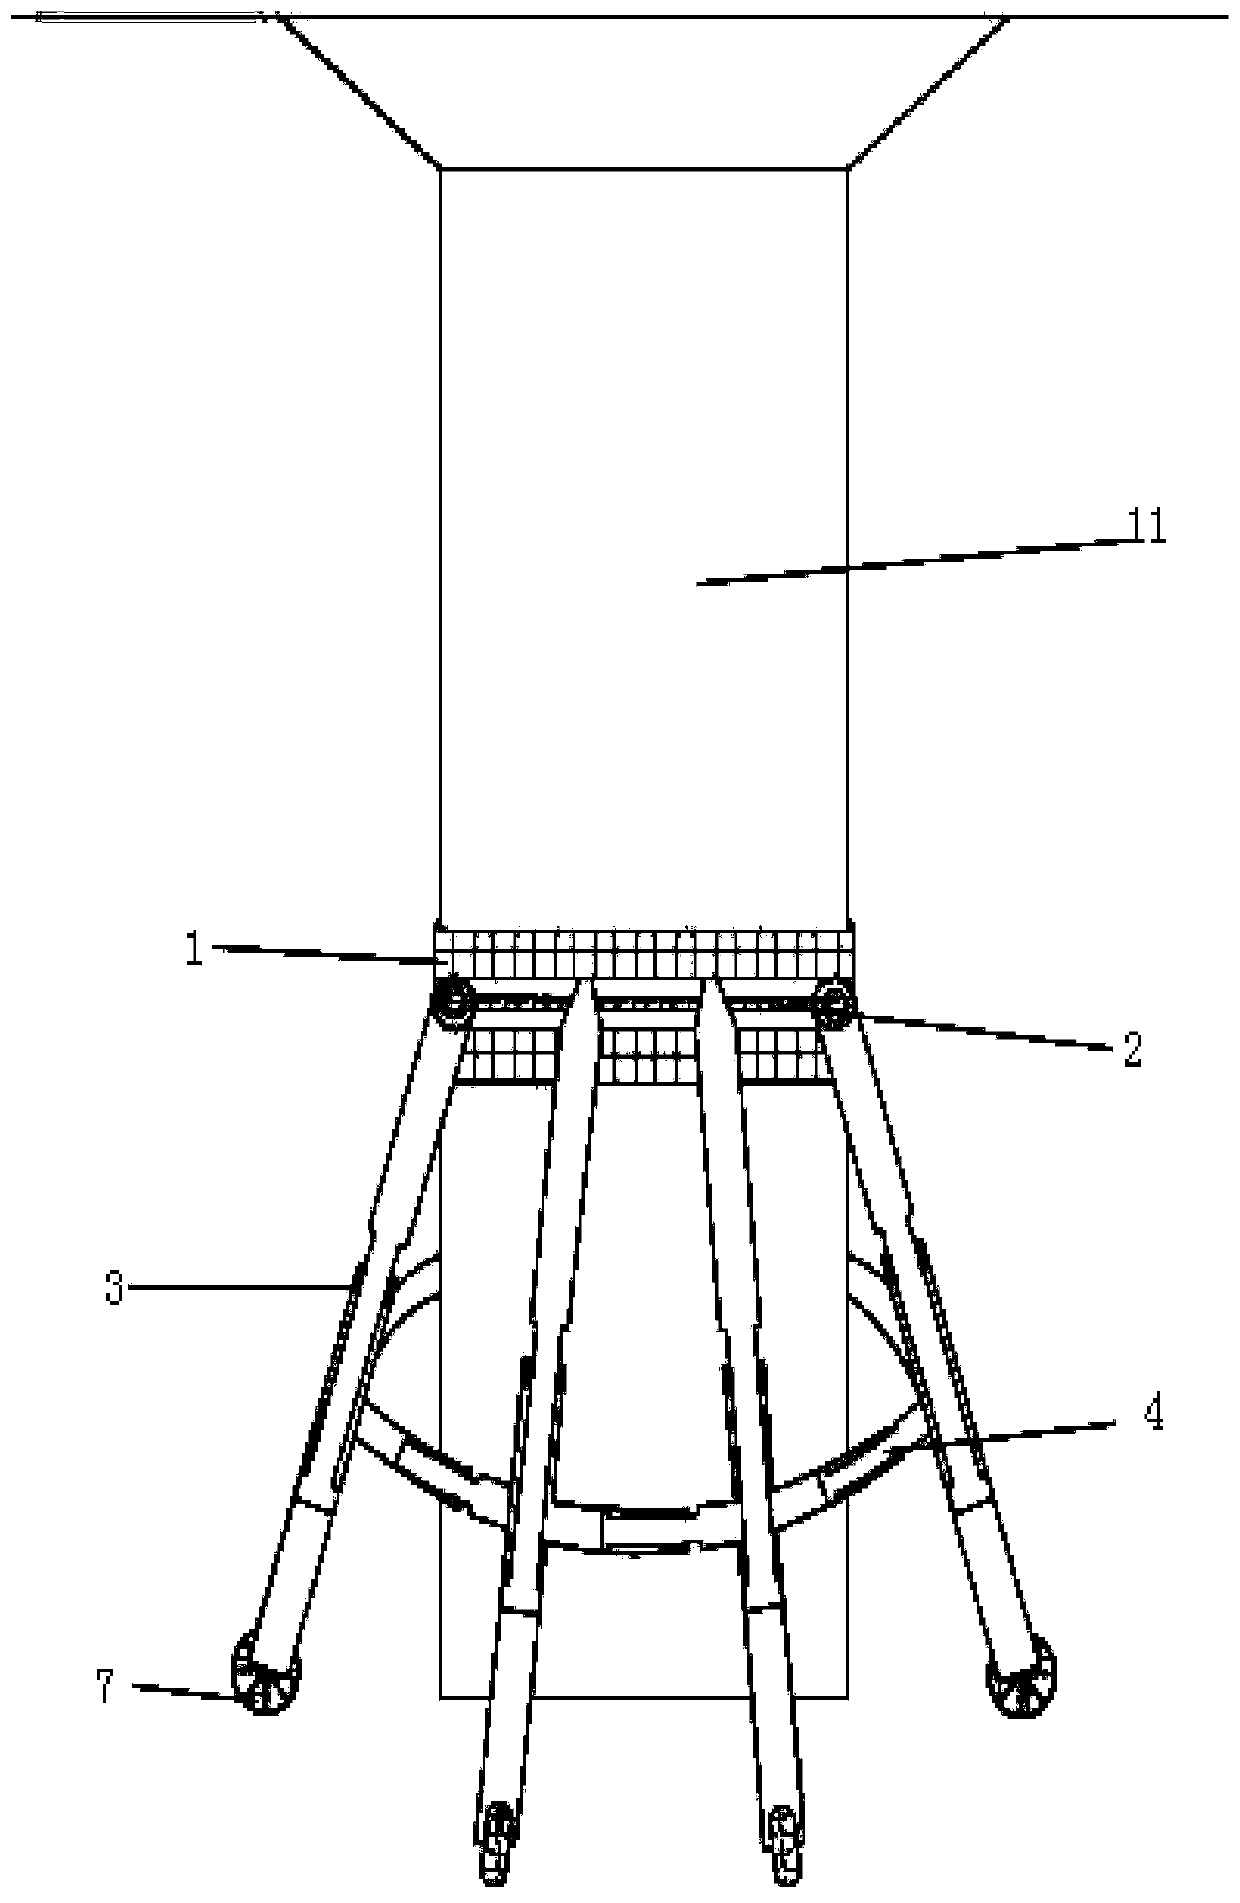 Automatic triggering umbrella type protection device for preventing pier from being damaged by collision